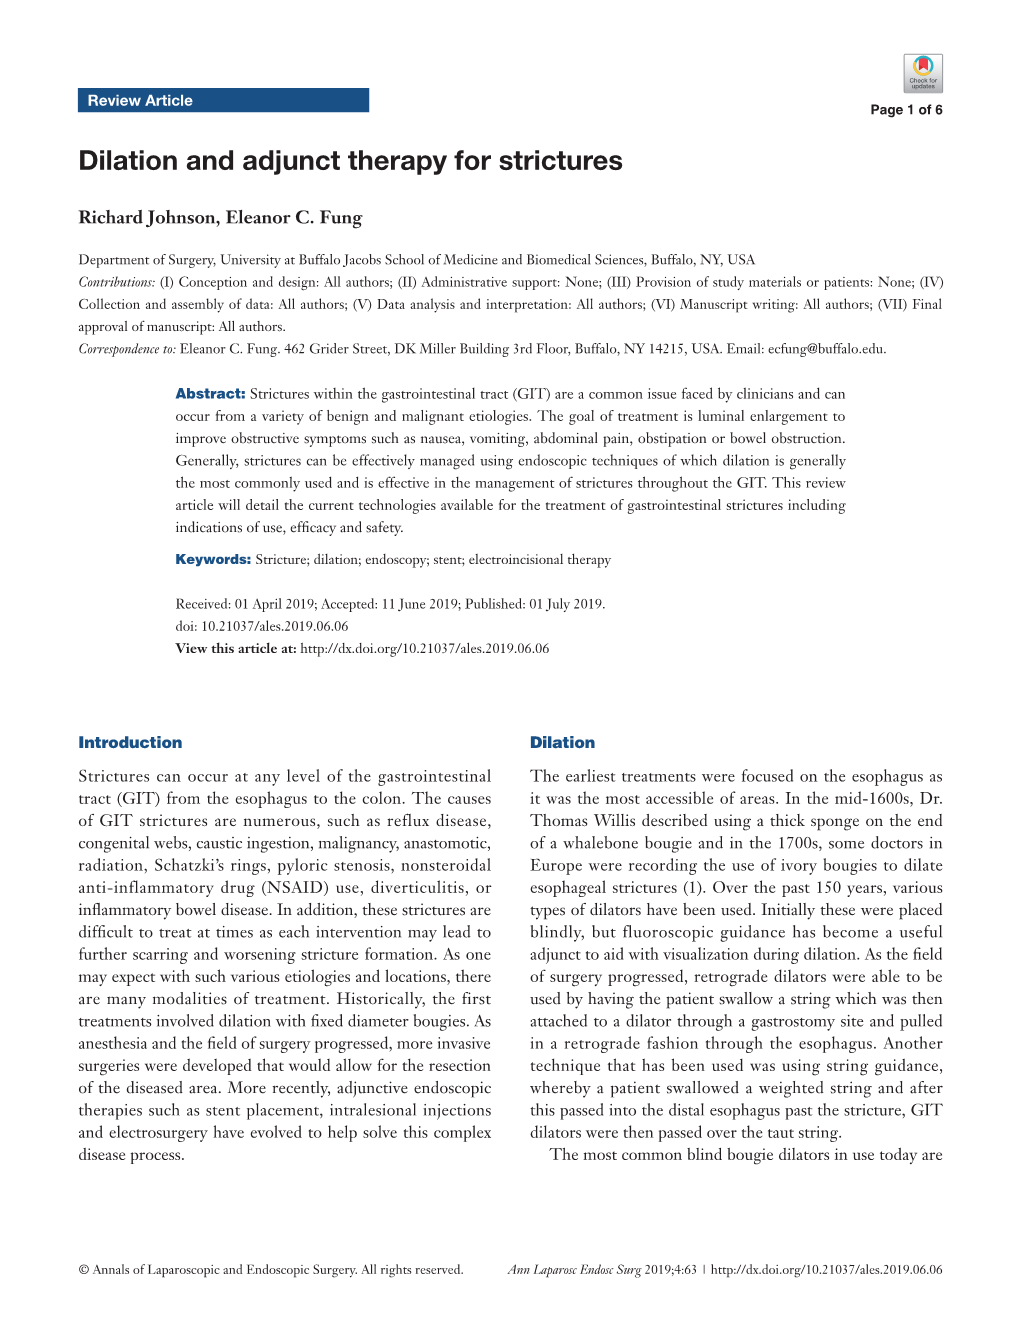 Dilation and Adjunct Therapy for Strictures